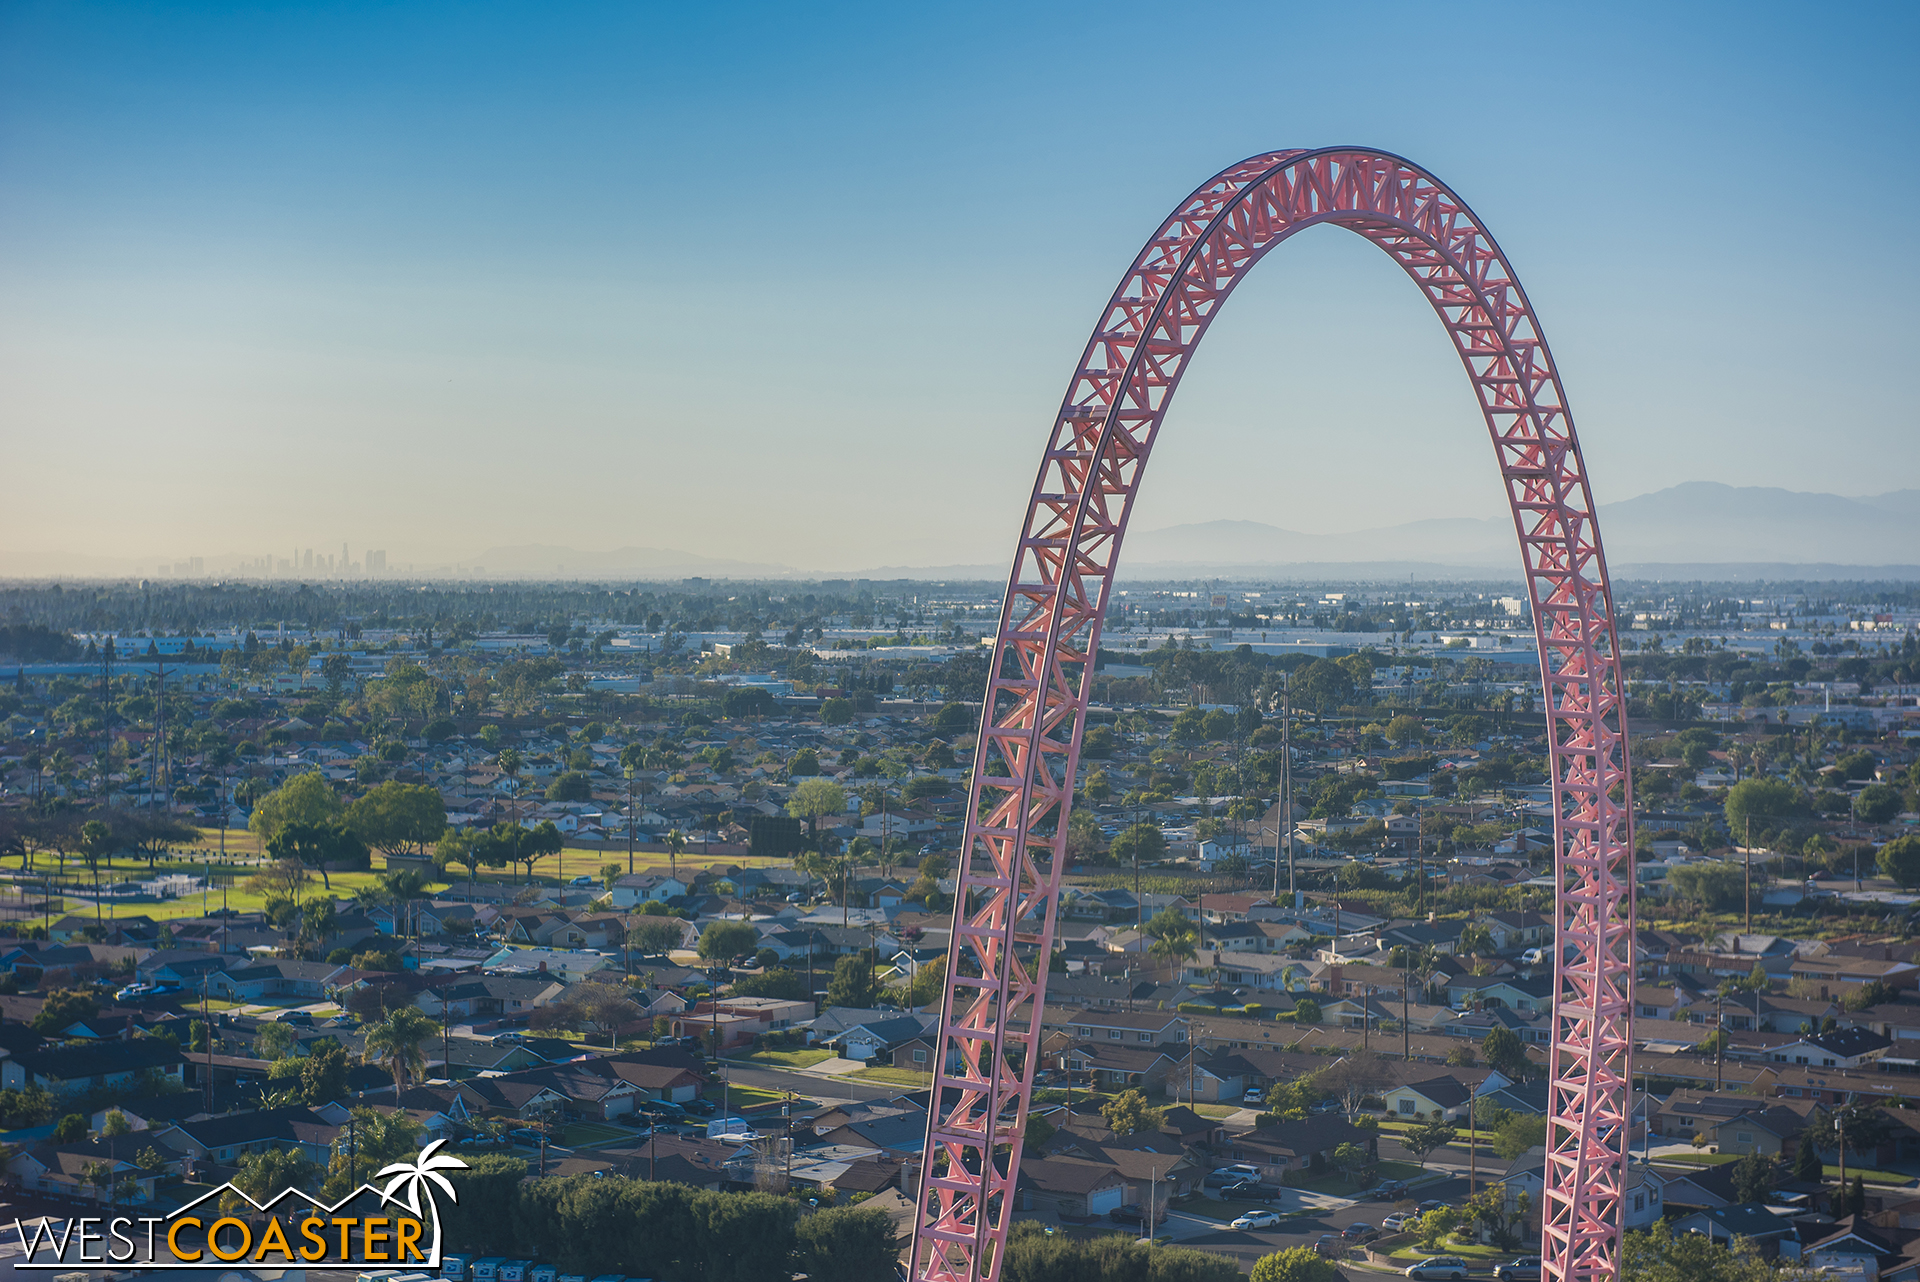  On a clear day, you can see to Downtown L.A.!  This… is still smoggy, but you can see the skyline behind Xcelerator! 